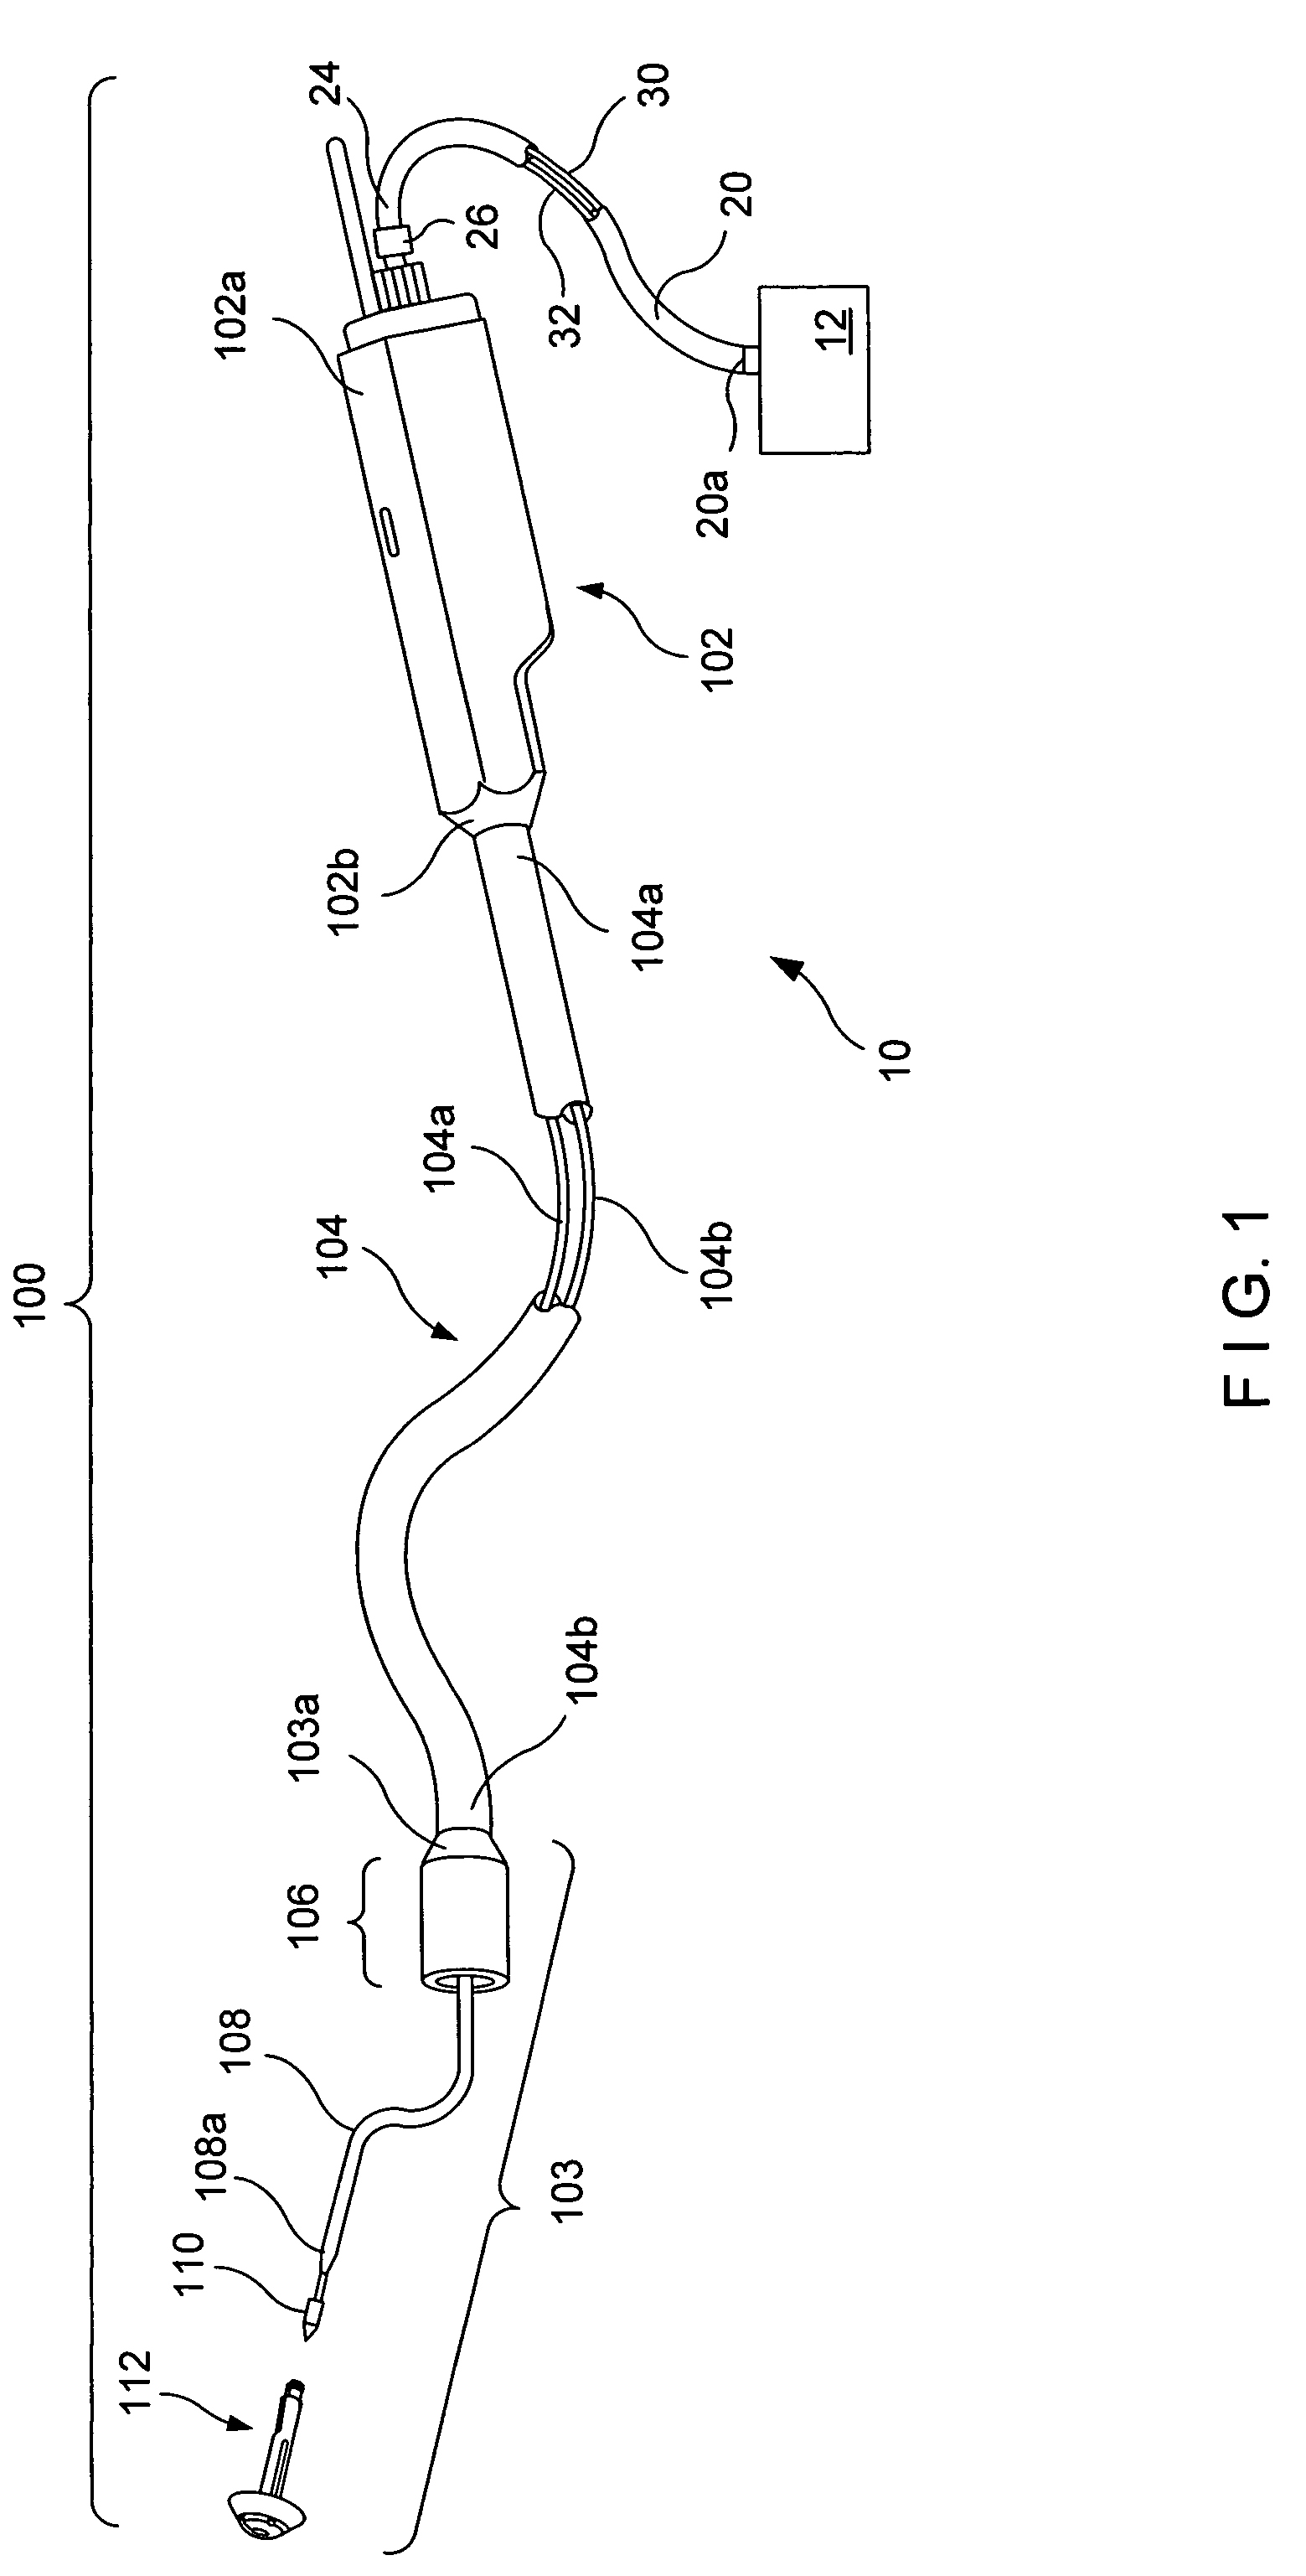 Surgical cutting and stapling device